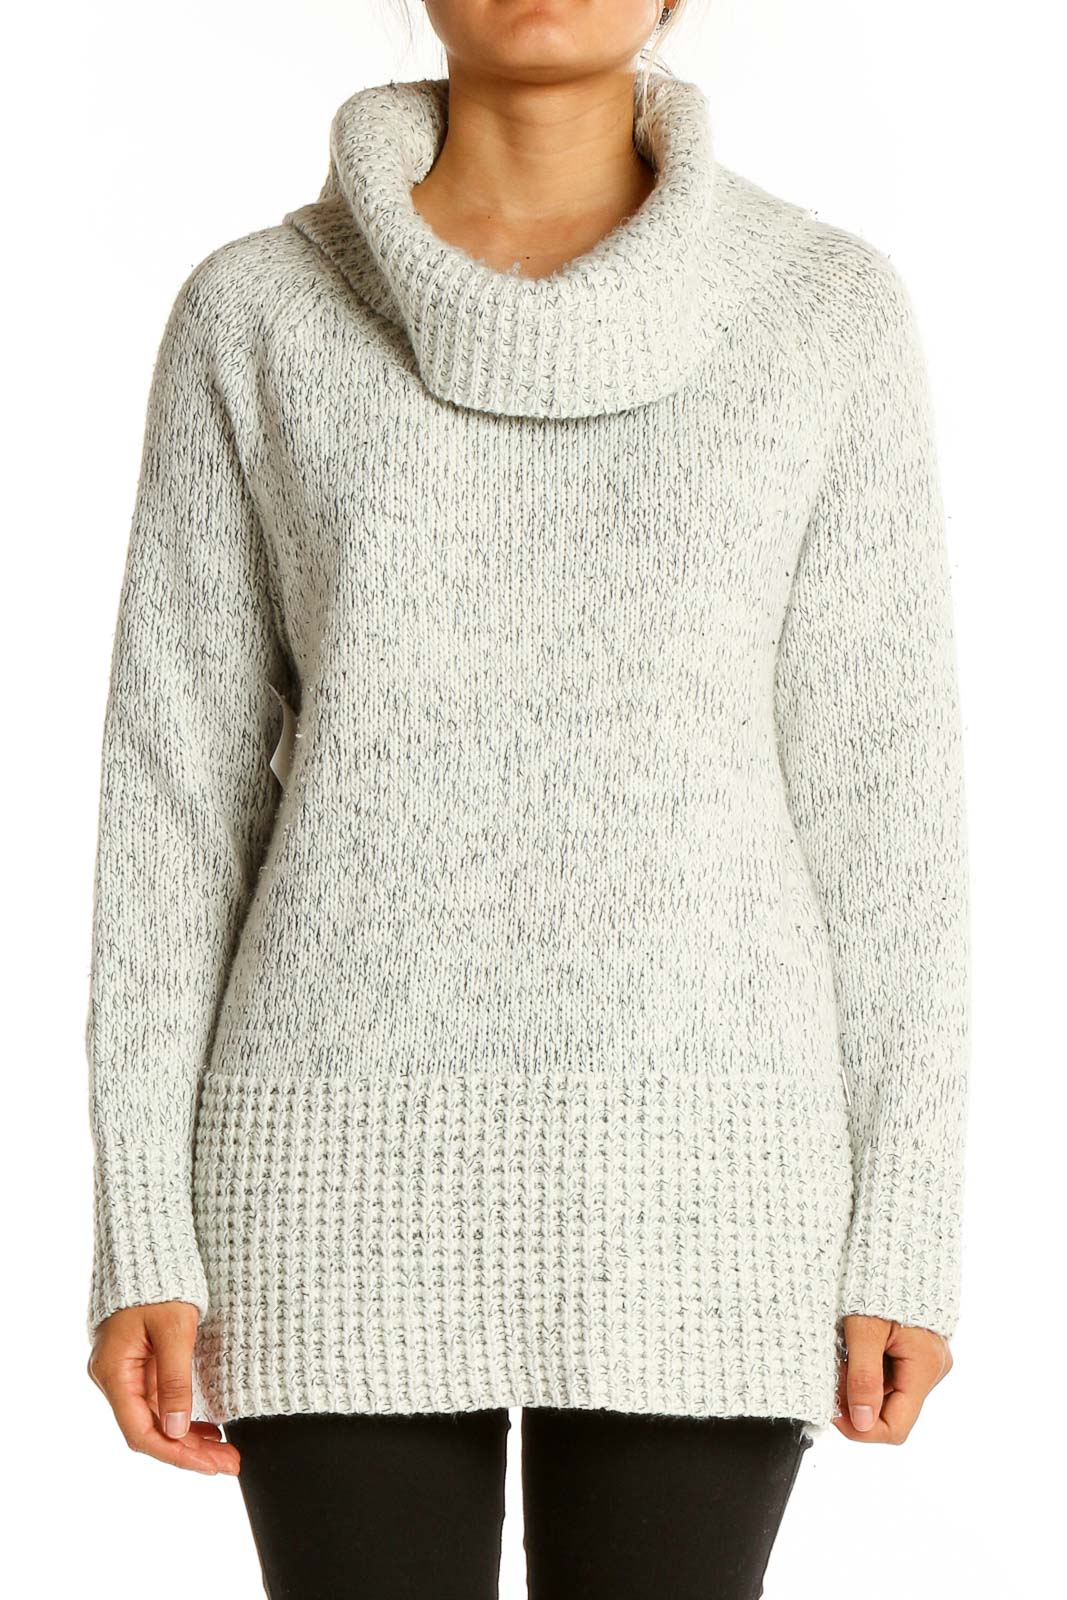 White Gray Turtle Neck Sweater Front